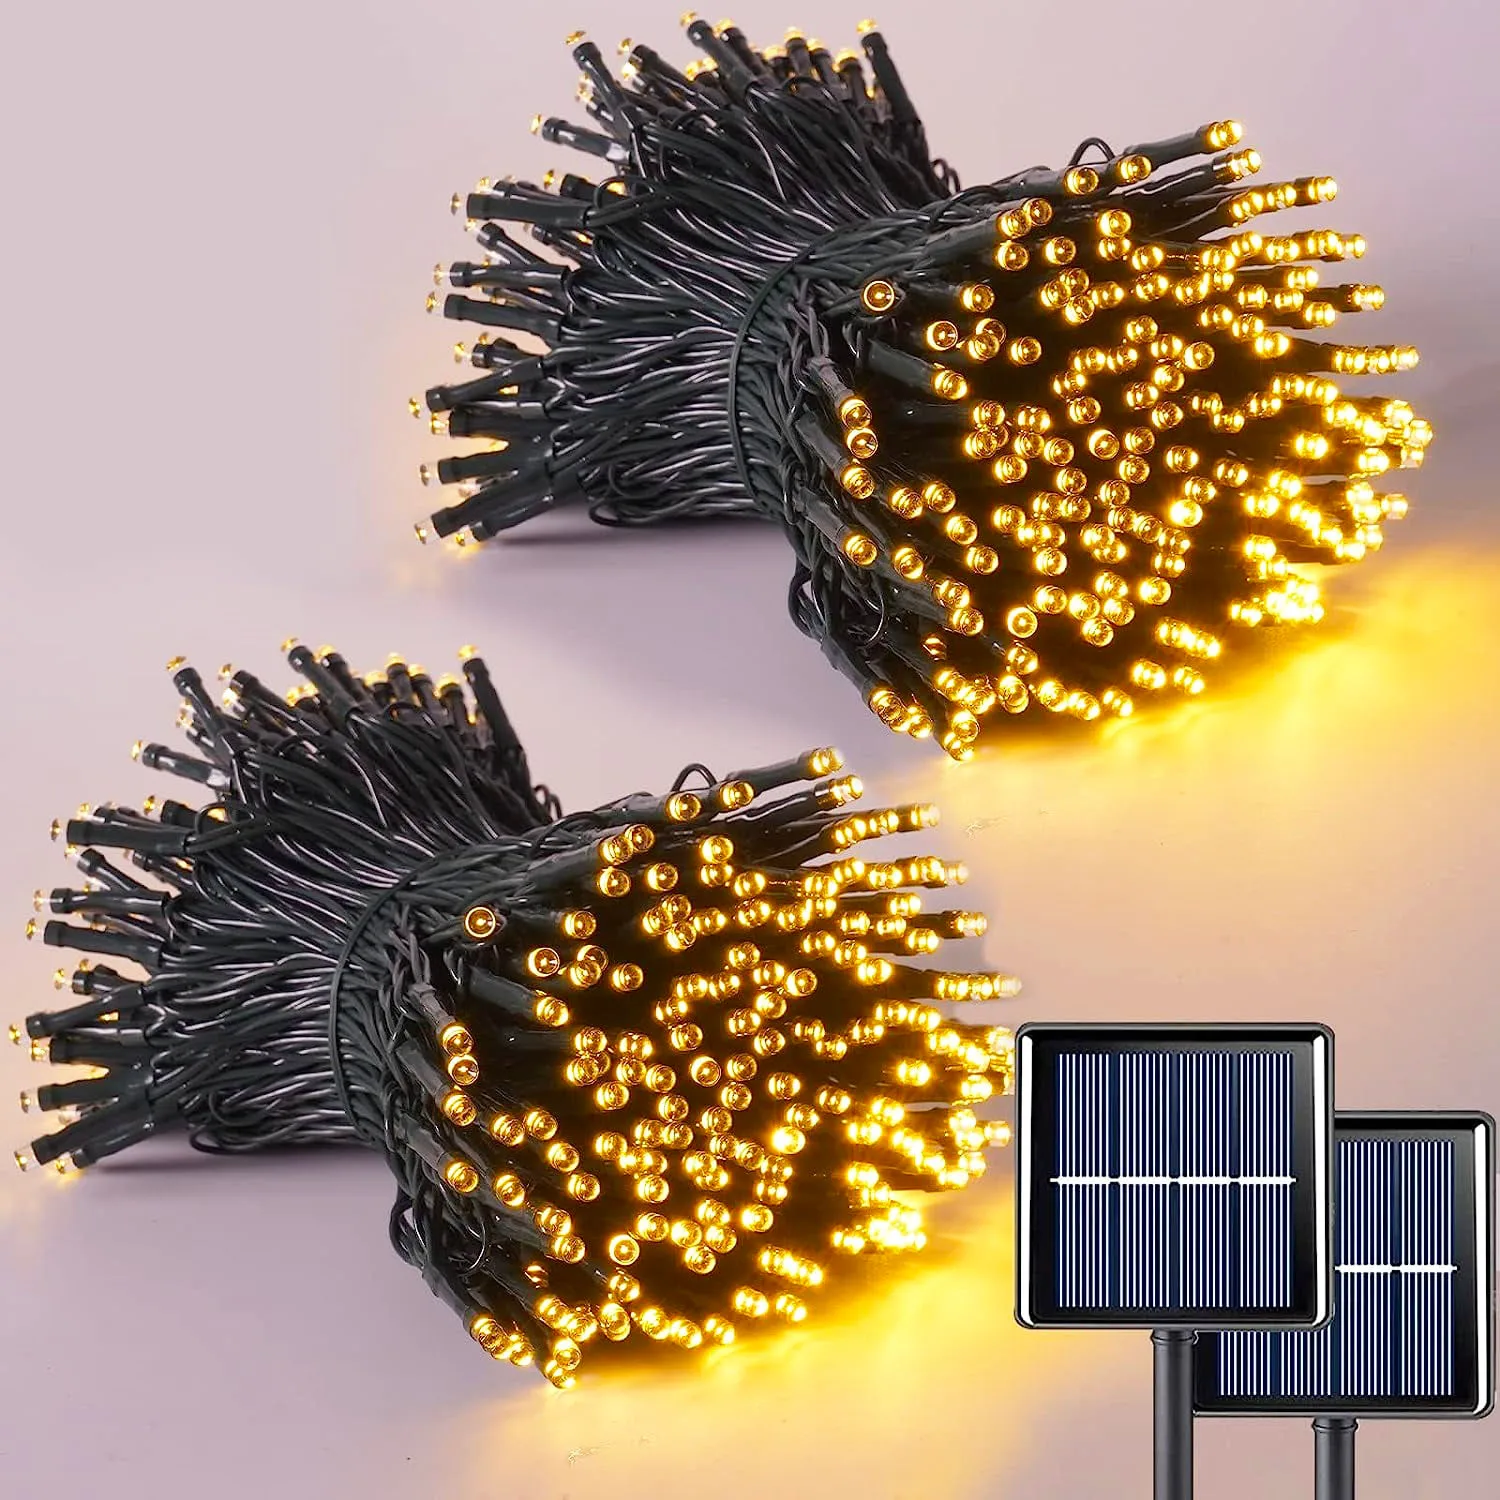 2Pack Solar String Lights Outdoor Waterproof Fairy Christmas Twinkle Lights with 8 Modes Tree Lights for Outdoor Garden Patio